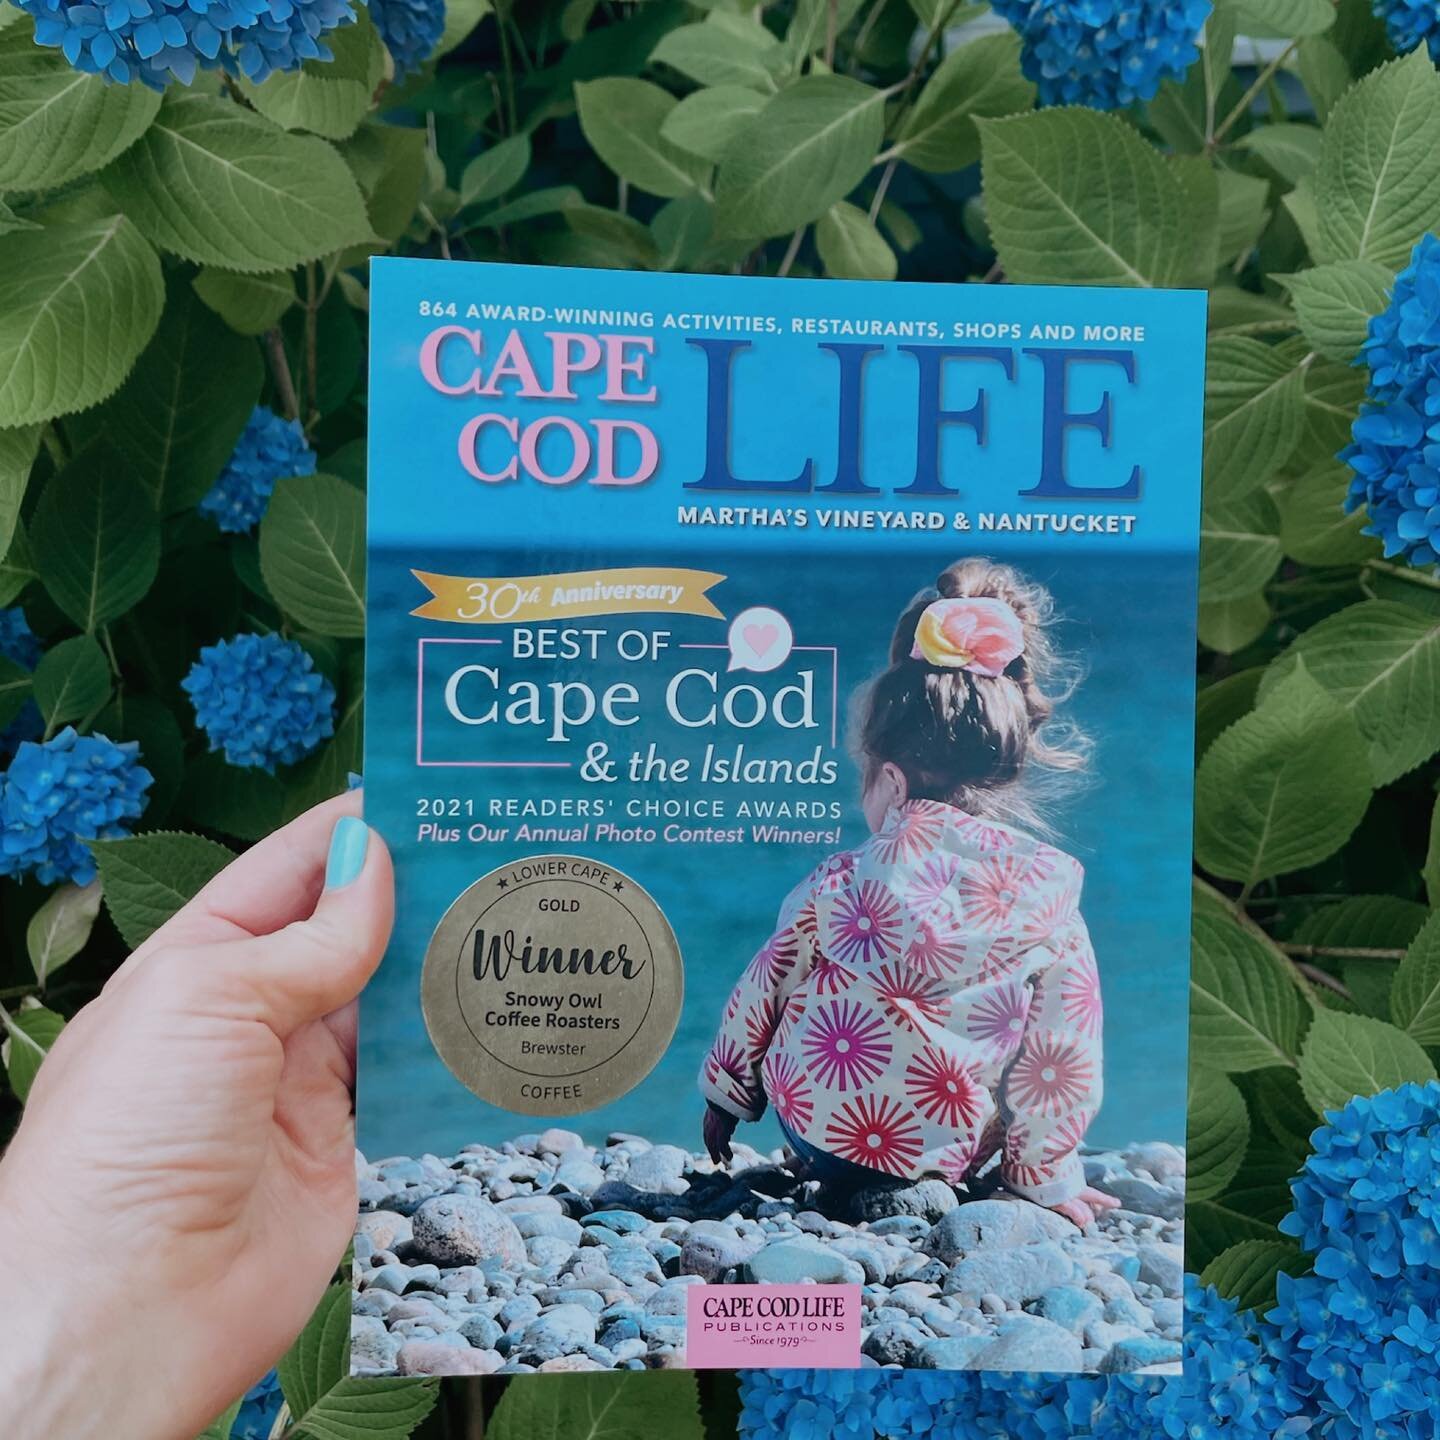 A belated but sincere THANK YOU to everyone who took the time to vote for us in this year&rsquo;s &ldquo;Best of Cape Cod &amp; the Islands&rdquo; by @capecodlife . We are honored to have your vote and stand beside so many other Cape Cod businesses ?